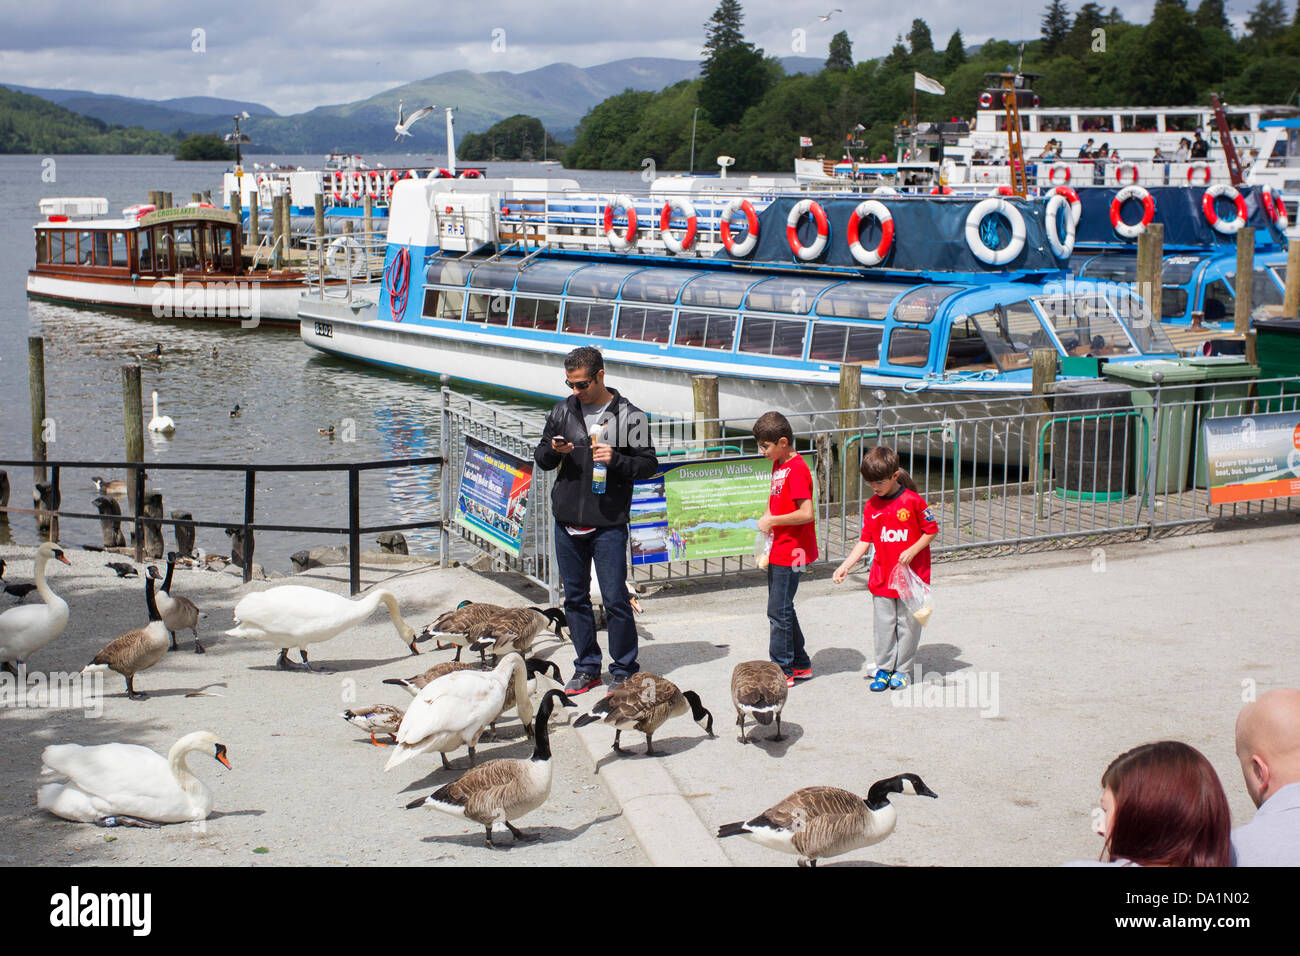 Bowness on Windermere, Cumbria, UK. 1st July 2013. Bowness bay on Lake Windermere. Swans & geese being feed with passenger cruise boats in the background Credit:  Shoosmith Collection/Alamy Live News Stock Photo